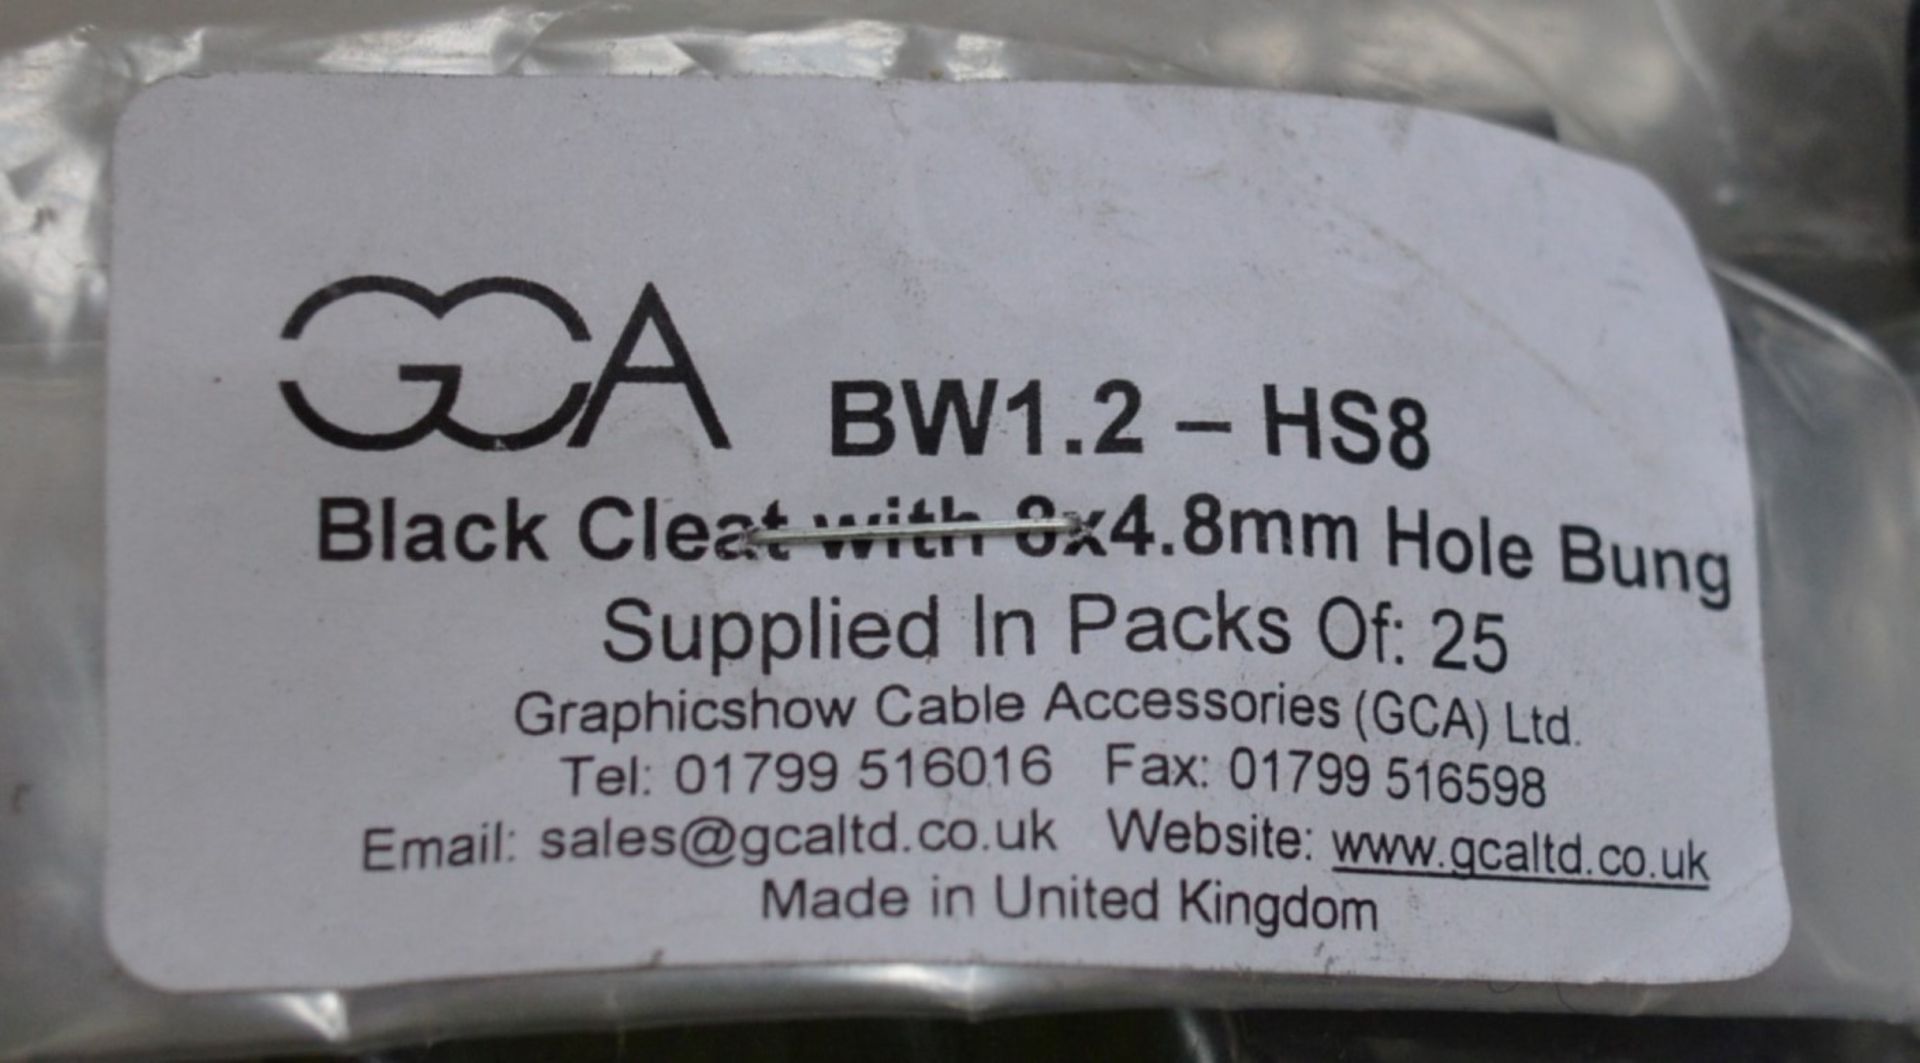 50 x Black Cleats With 8 x 4.8mm Hole Cable Bungs - Unused Bag of 25 - Type GCA BW1.2 HS8 - - Image 3 of 4